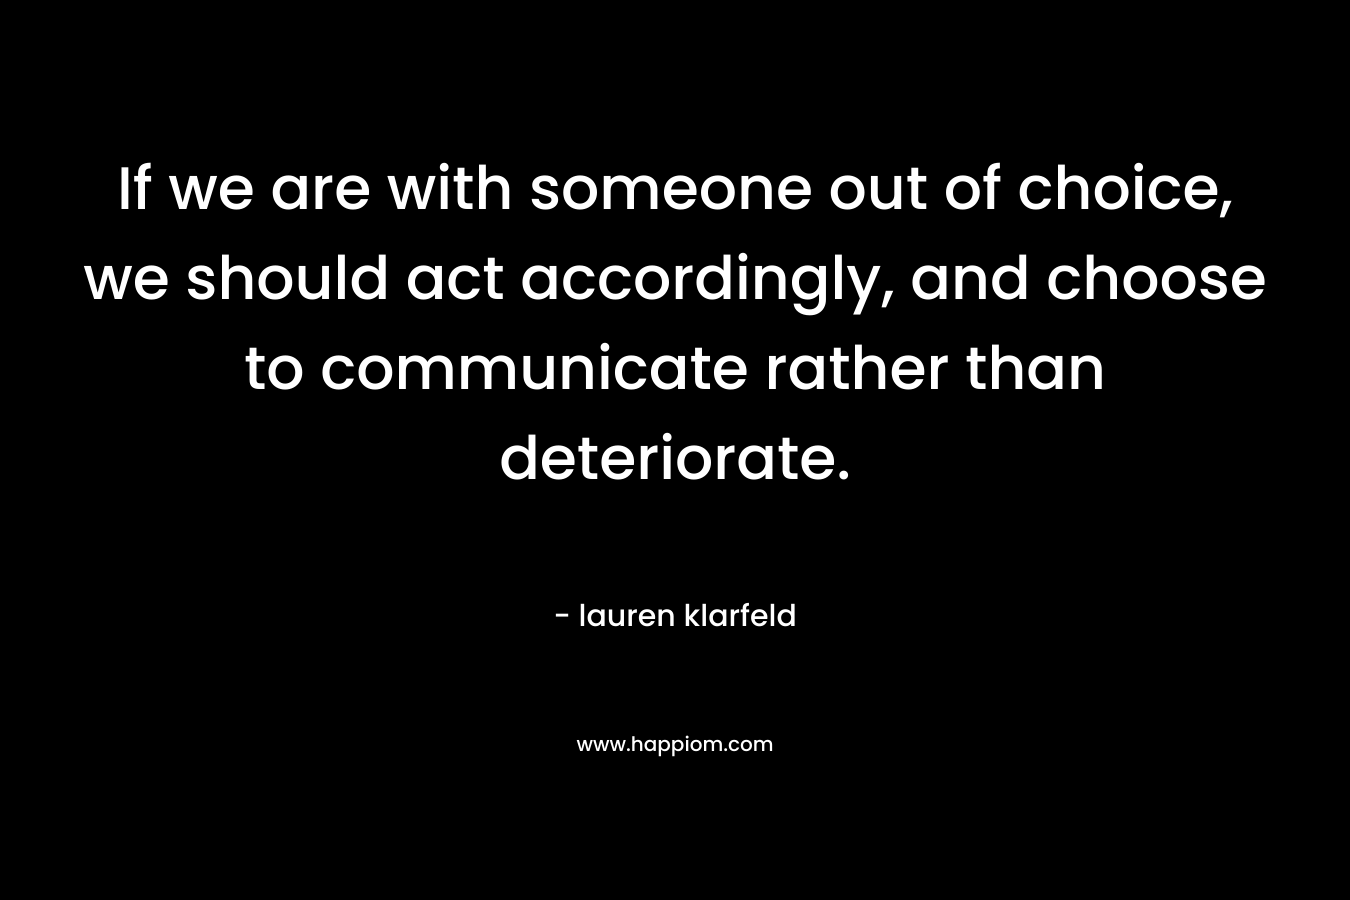 If we are with someone out of choice, we should act accordingly, and choose to communicate rather than deteriorate.